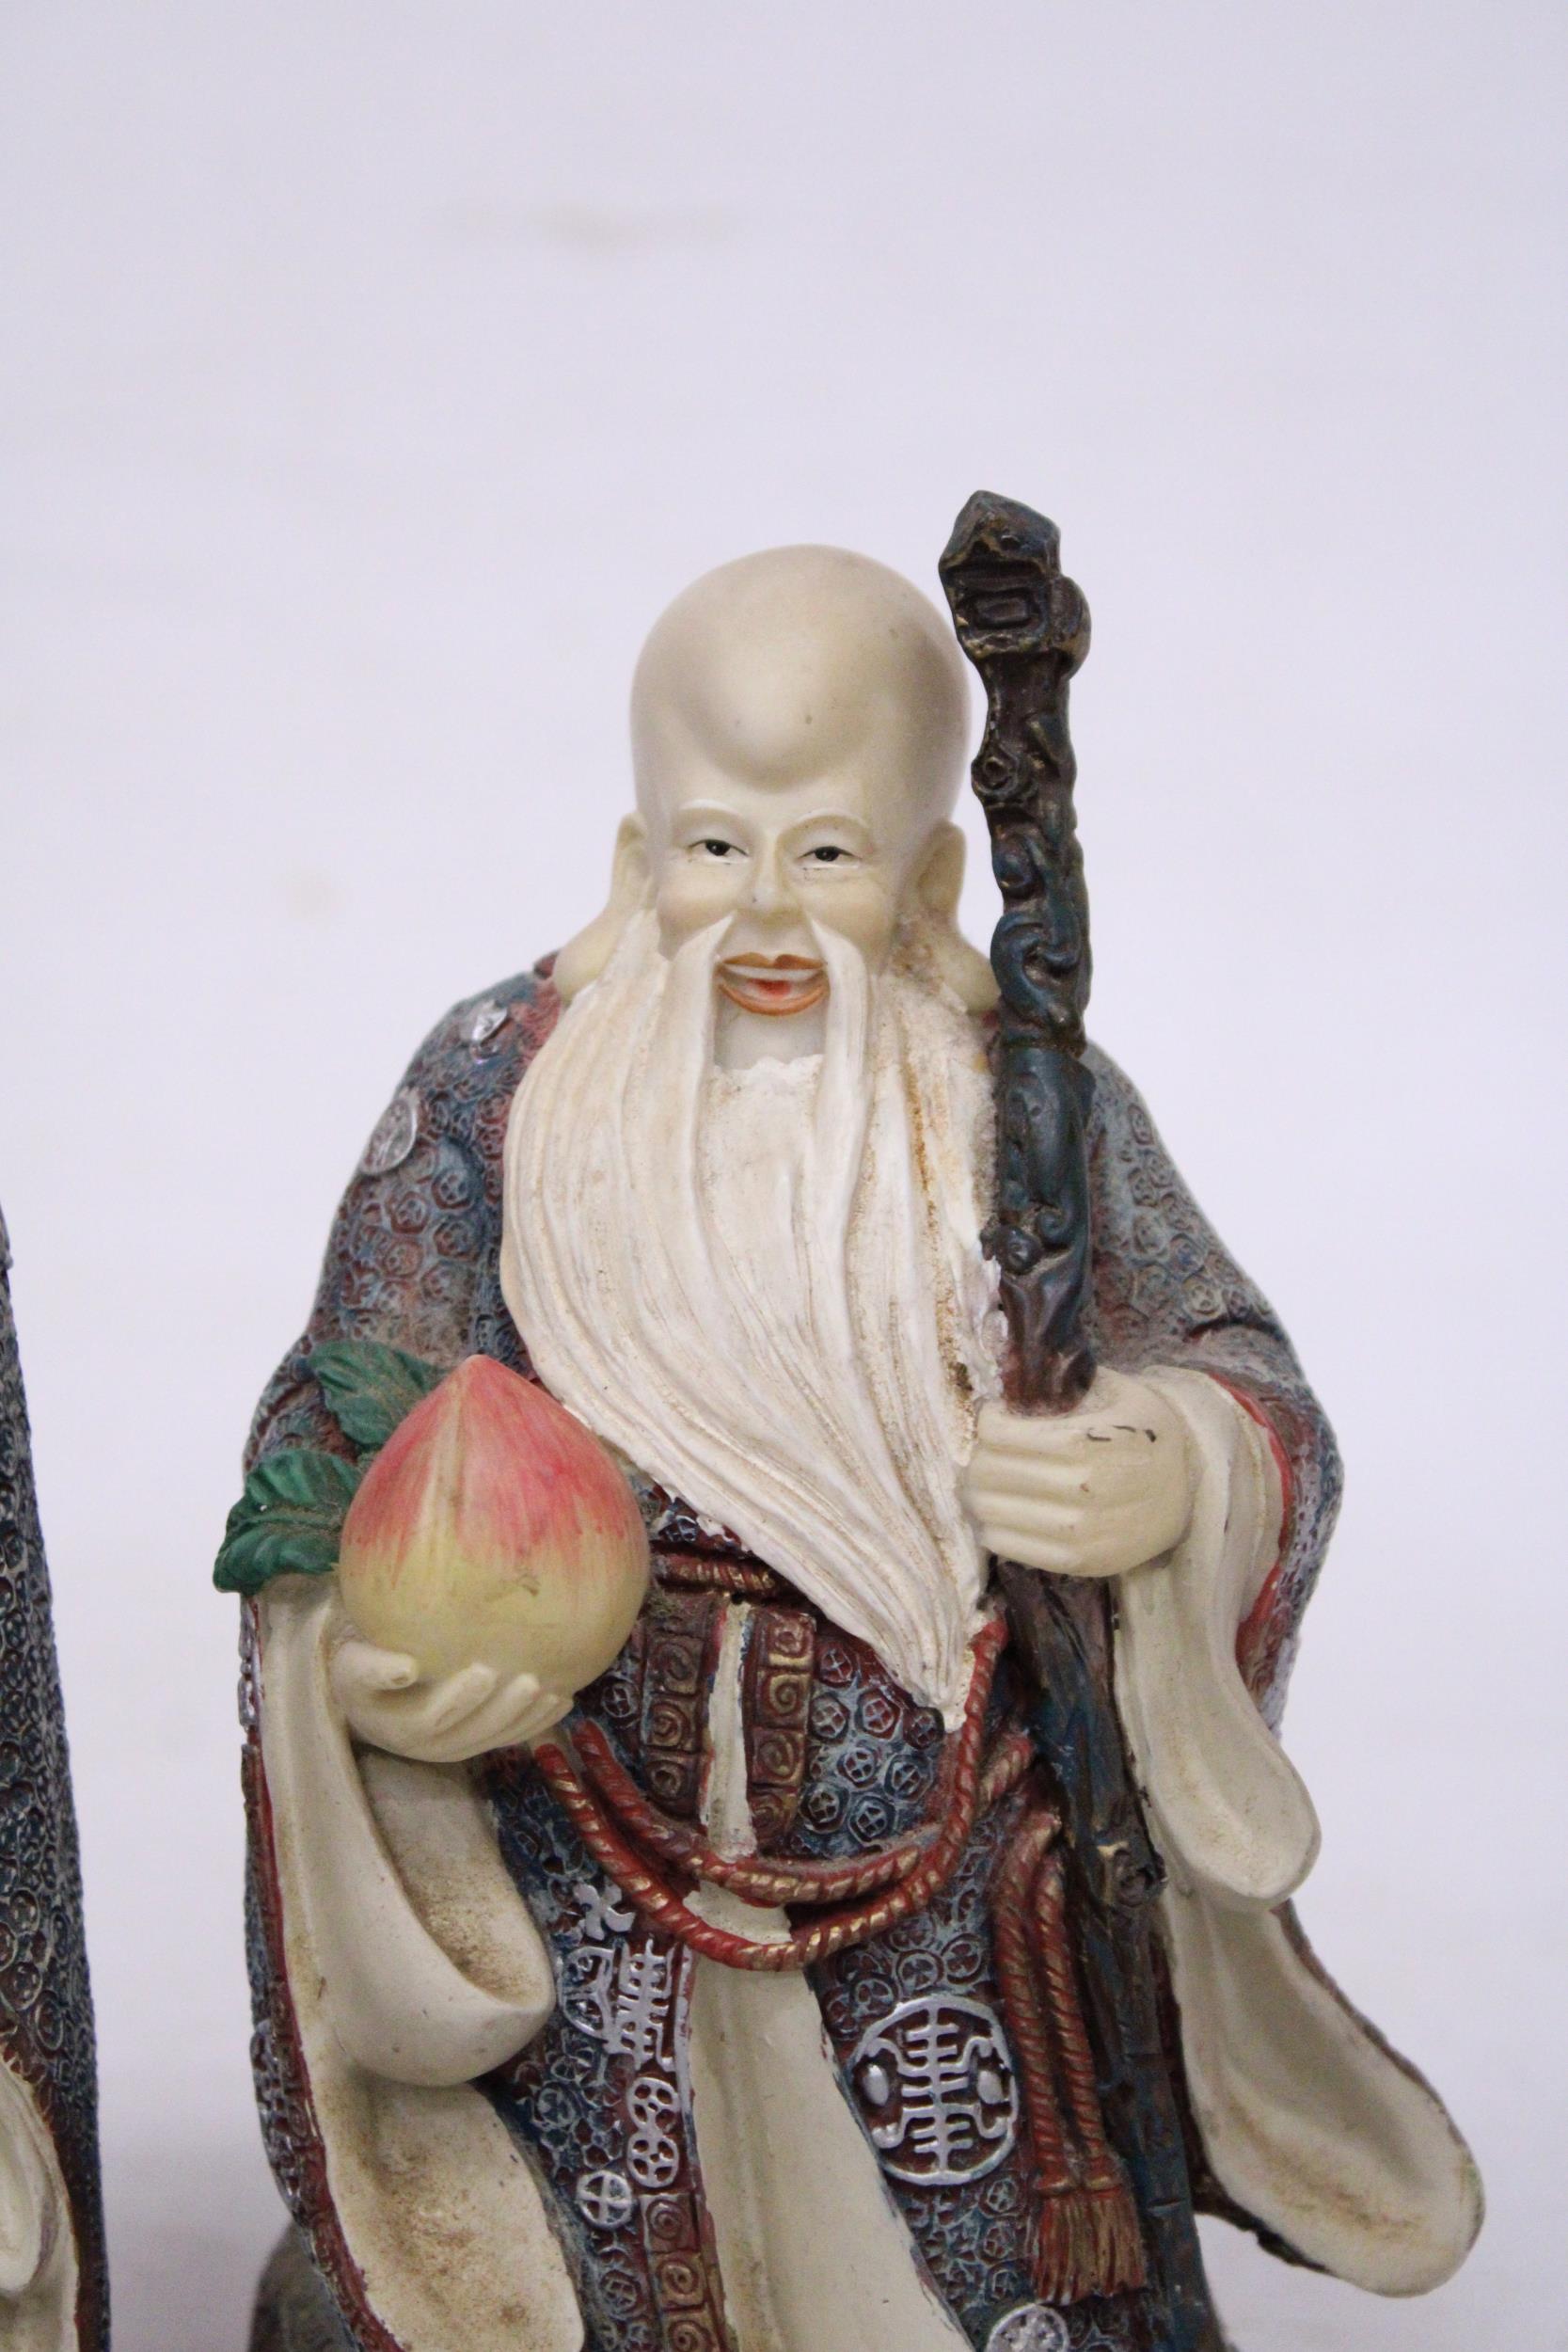 TWO HEAVY STONE MANDARIN FIGURES - 7 INCH (H) - Image 6 of 6